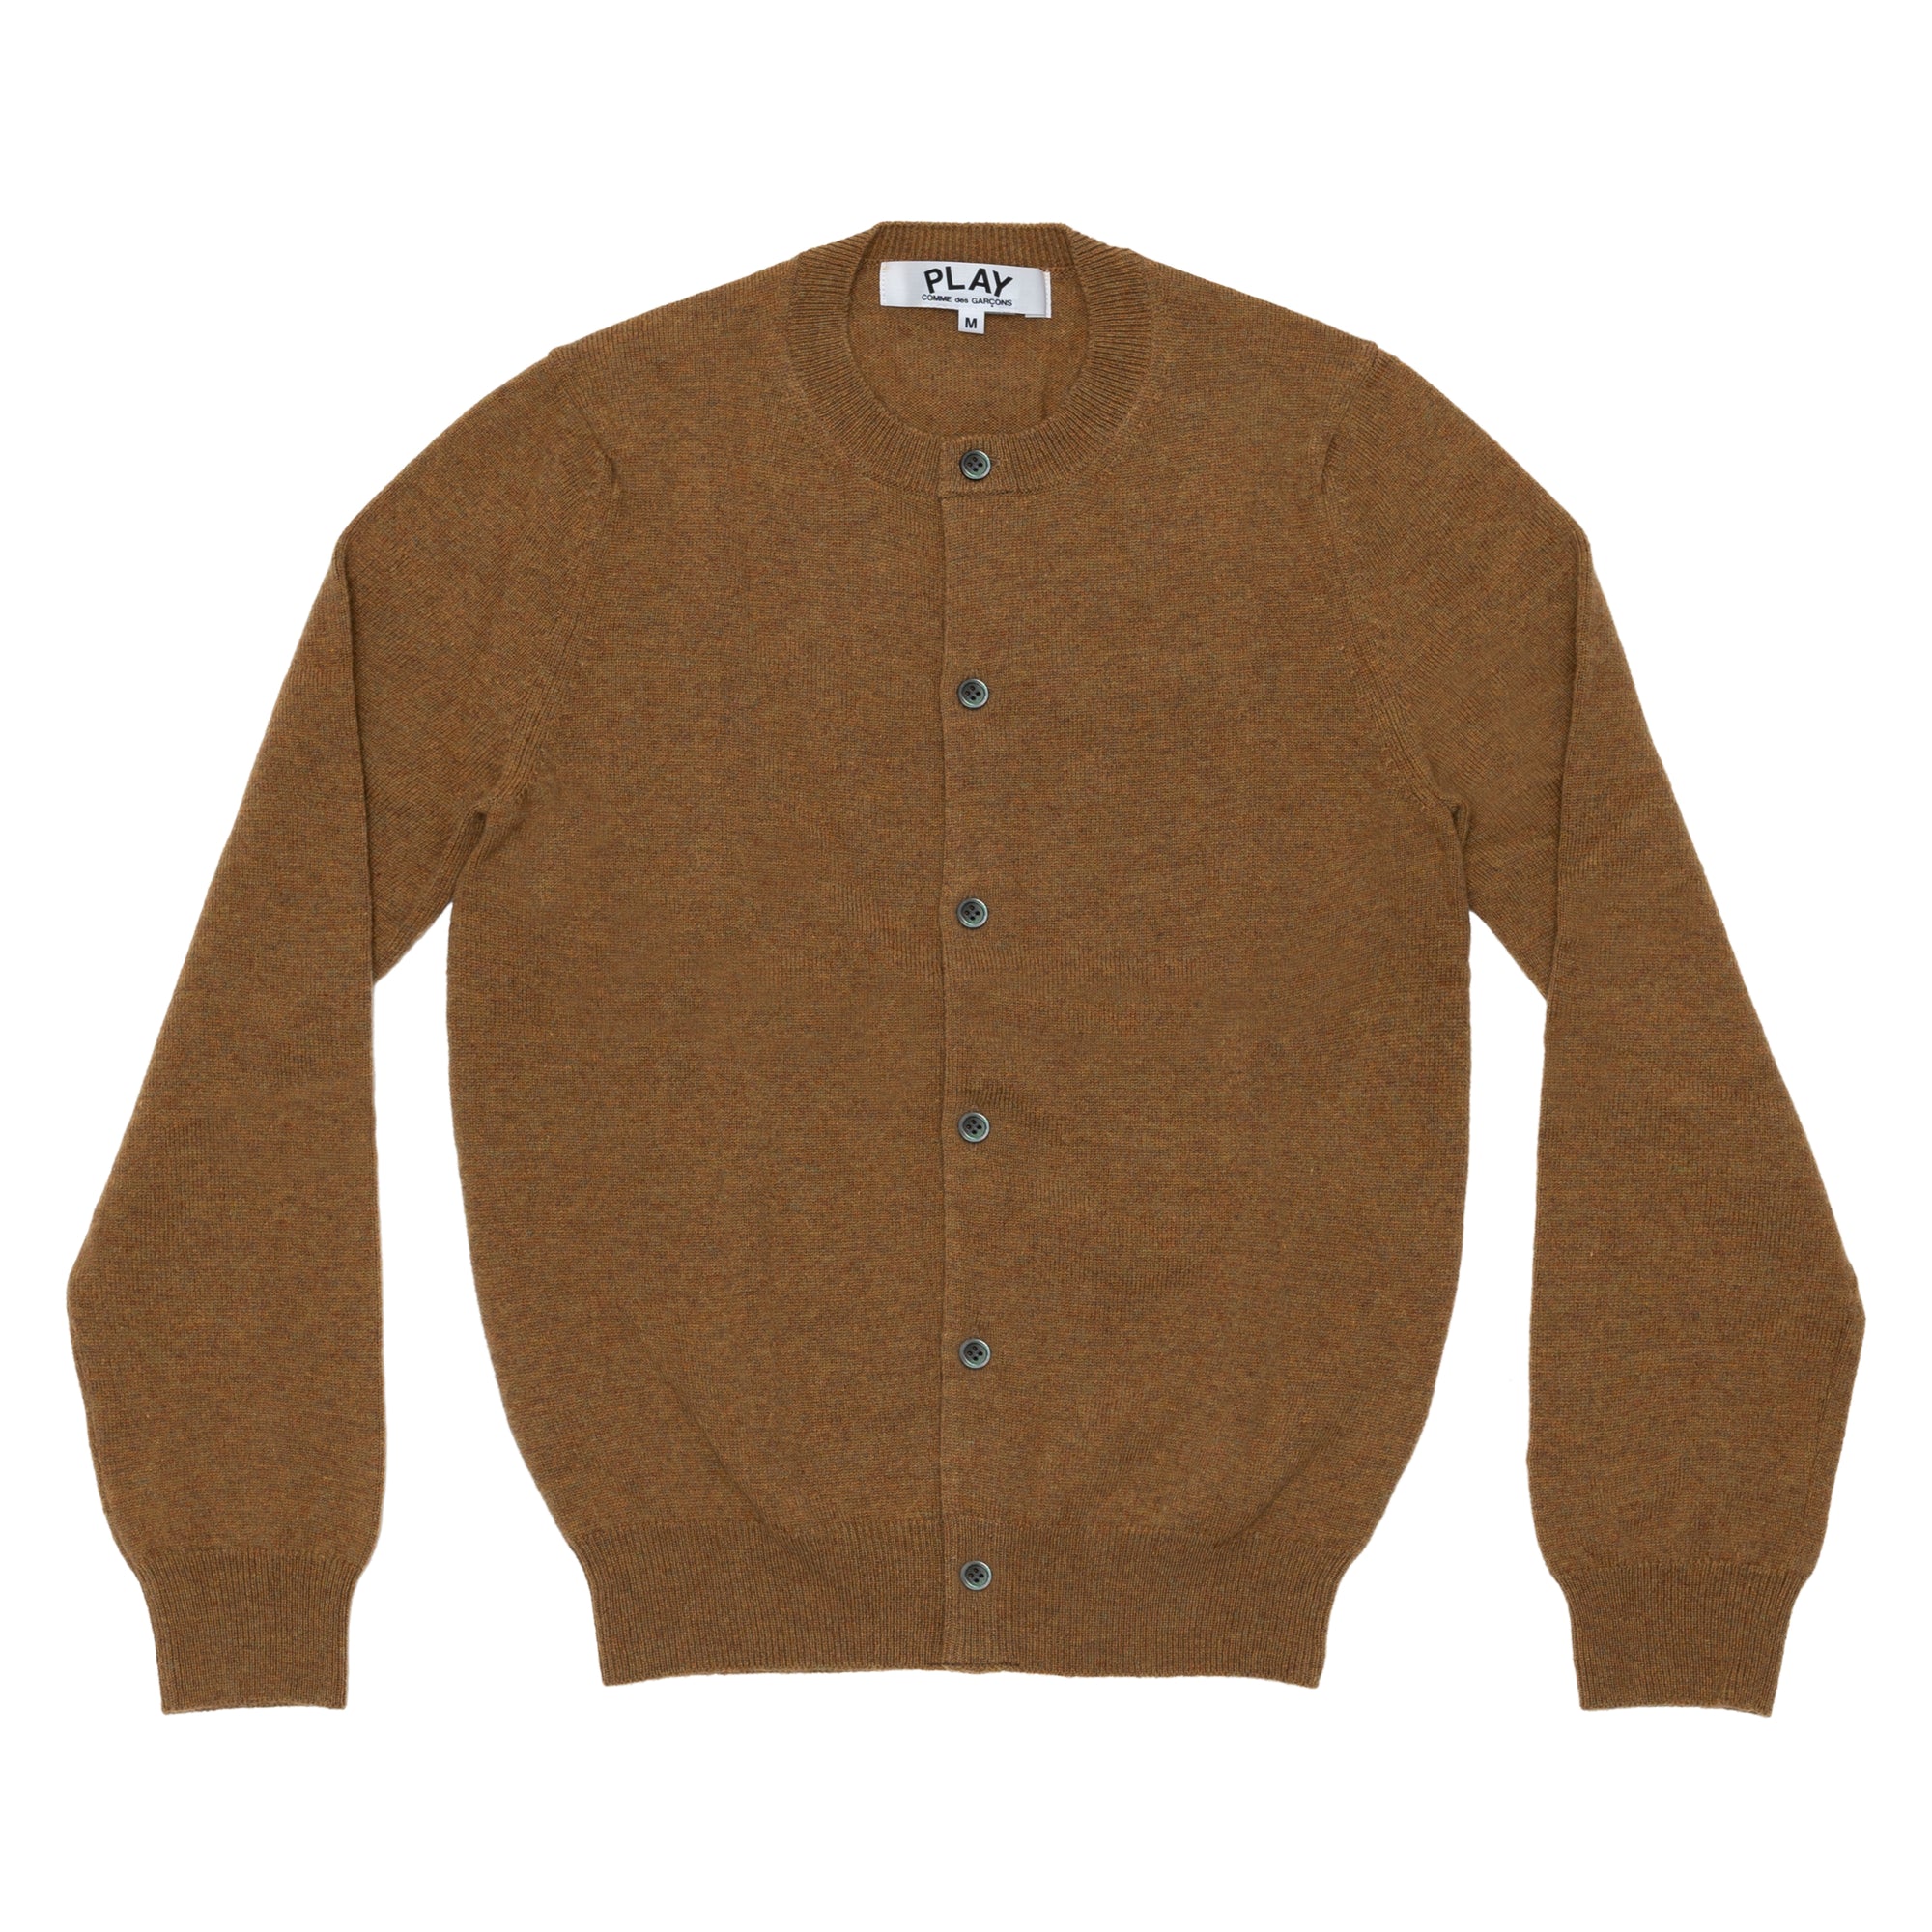 PLAY CDG  - Top Dyed Carded Lambswool Women's Cardigan - (Brown) view 1